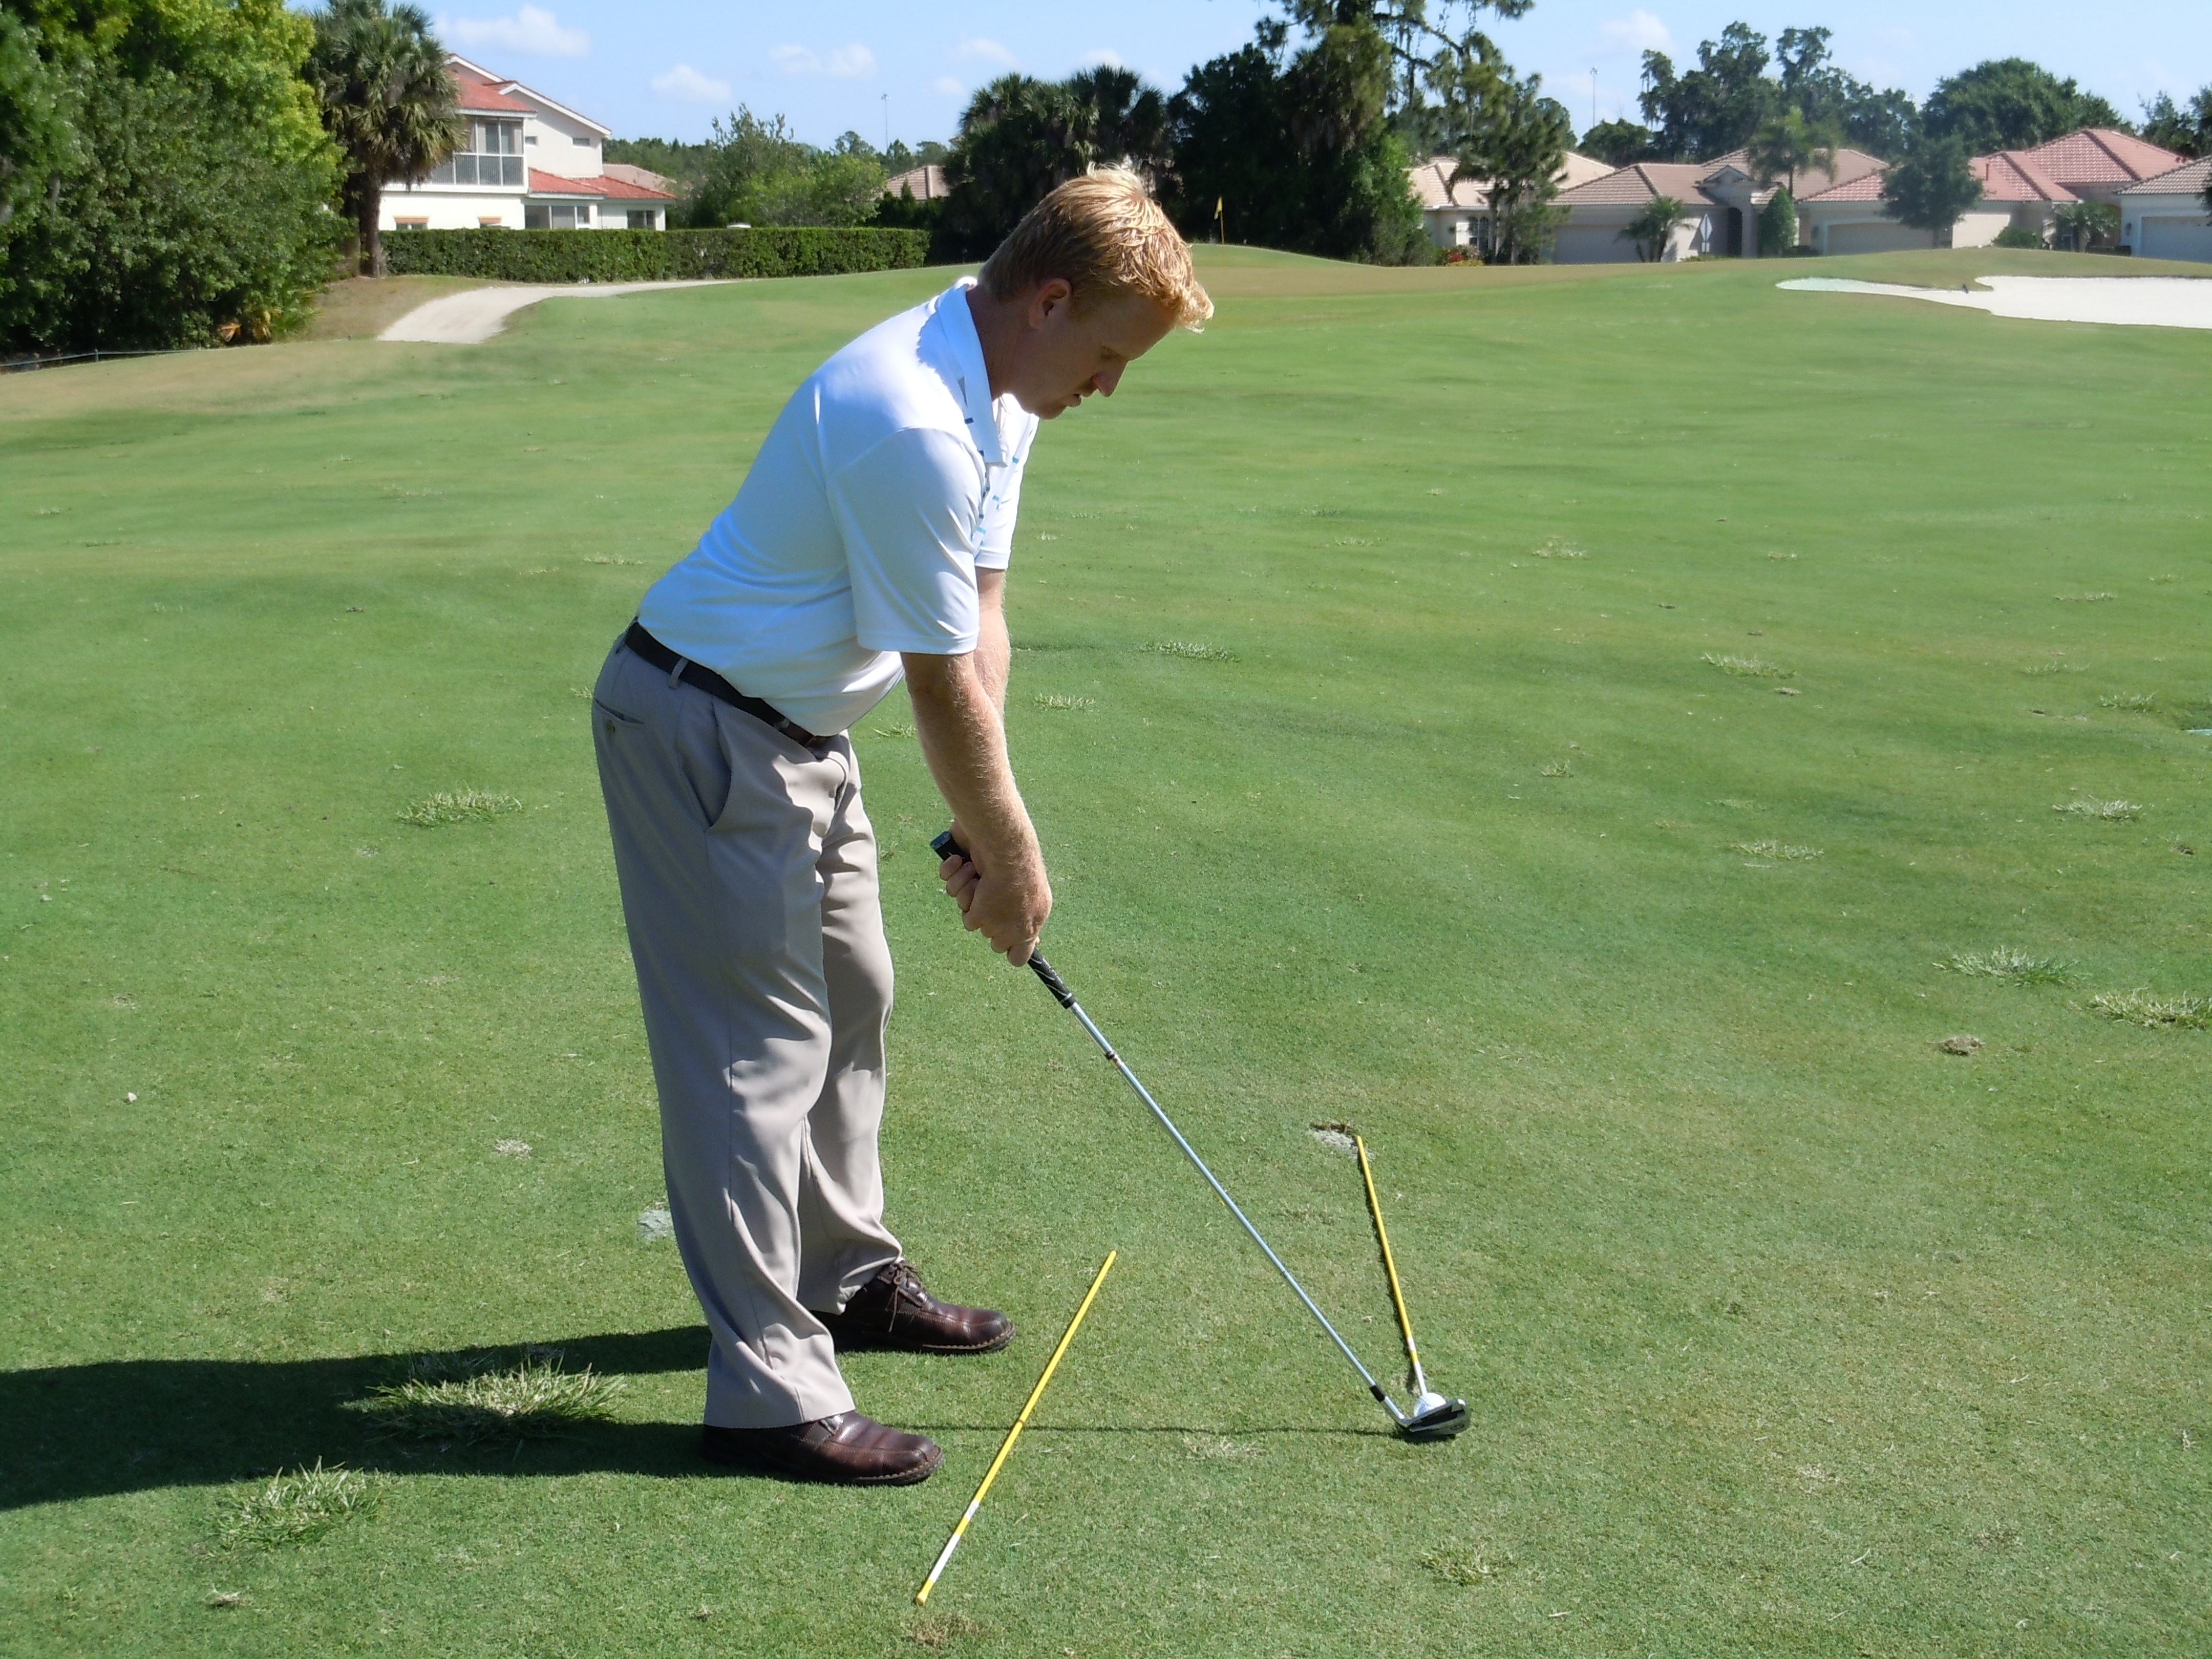 How To Set Up For A Draw Shot In Golf